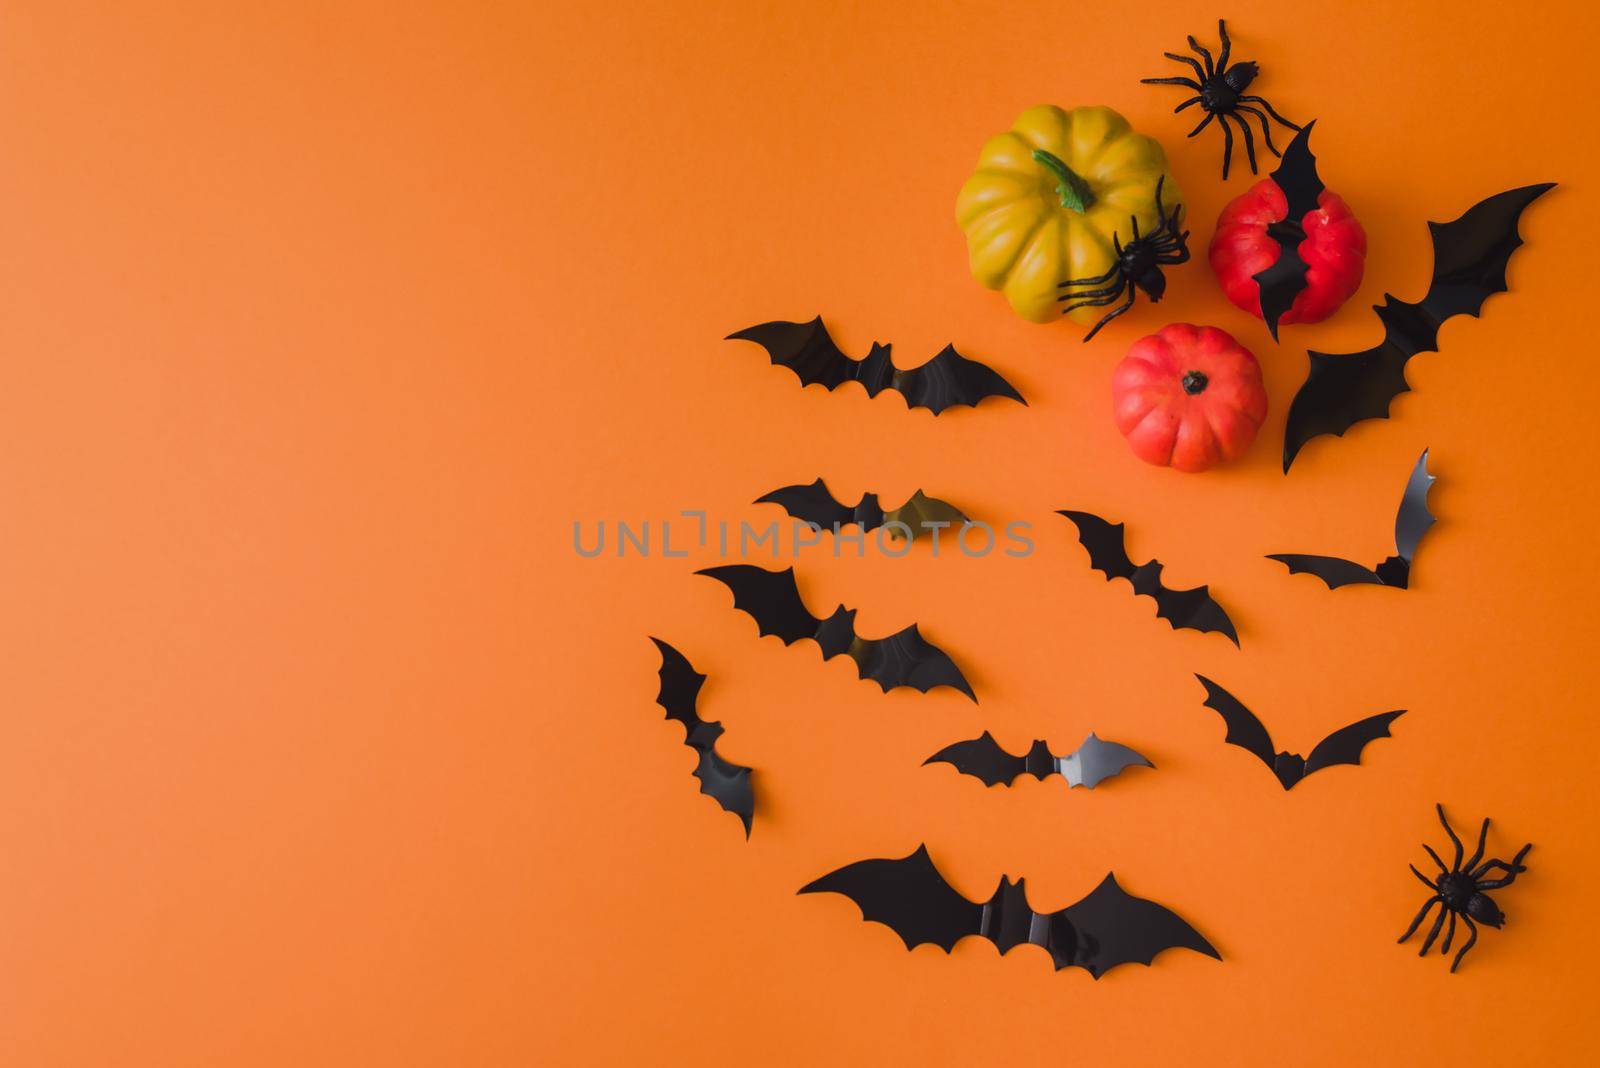 Happy halloween holiday. Halloween decorations, bats, spiders, pumpkins on an orange background. Flat lay, top view.